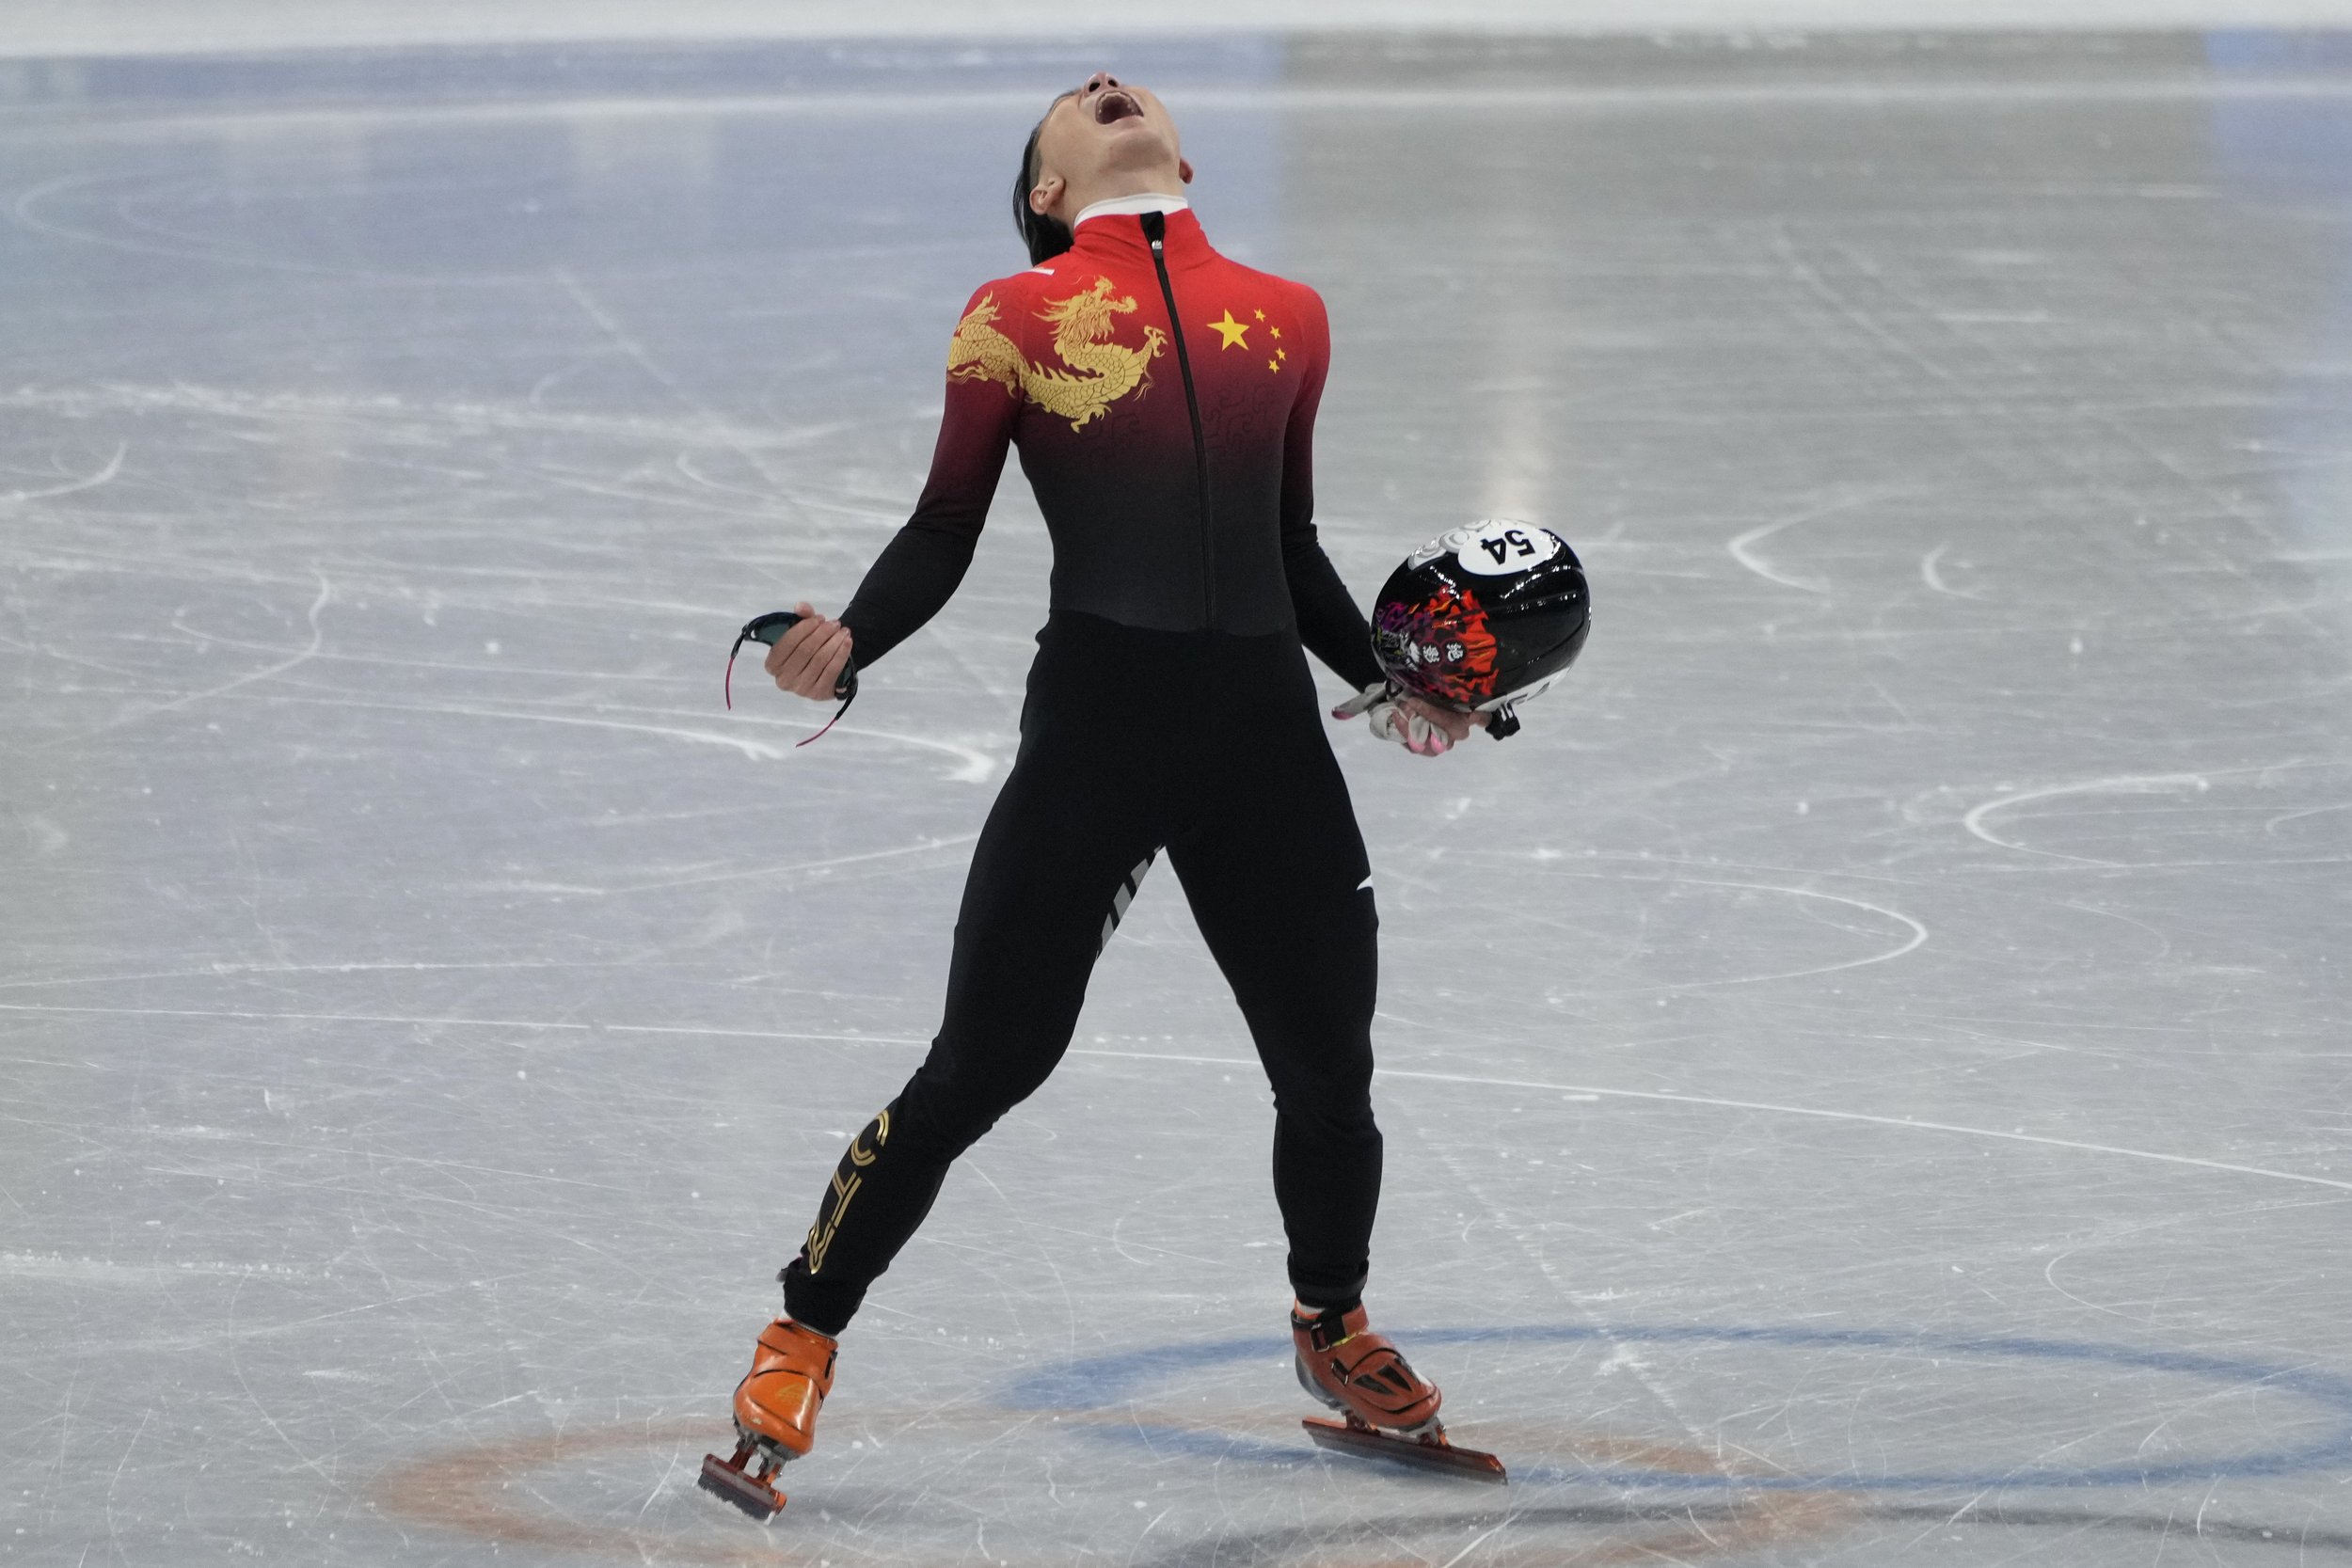  Ren Ziwei of China, reacts after winning the men's 1,000-meter final during the short track speedskating competition at the 2022 Winter Olympics, Monday, Feb. 7, 2022, in Beijing. (AP Photo/Natacha Pisarenko) 